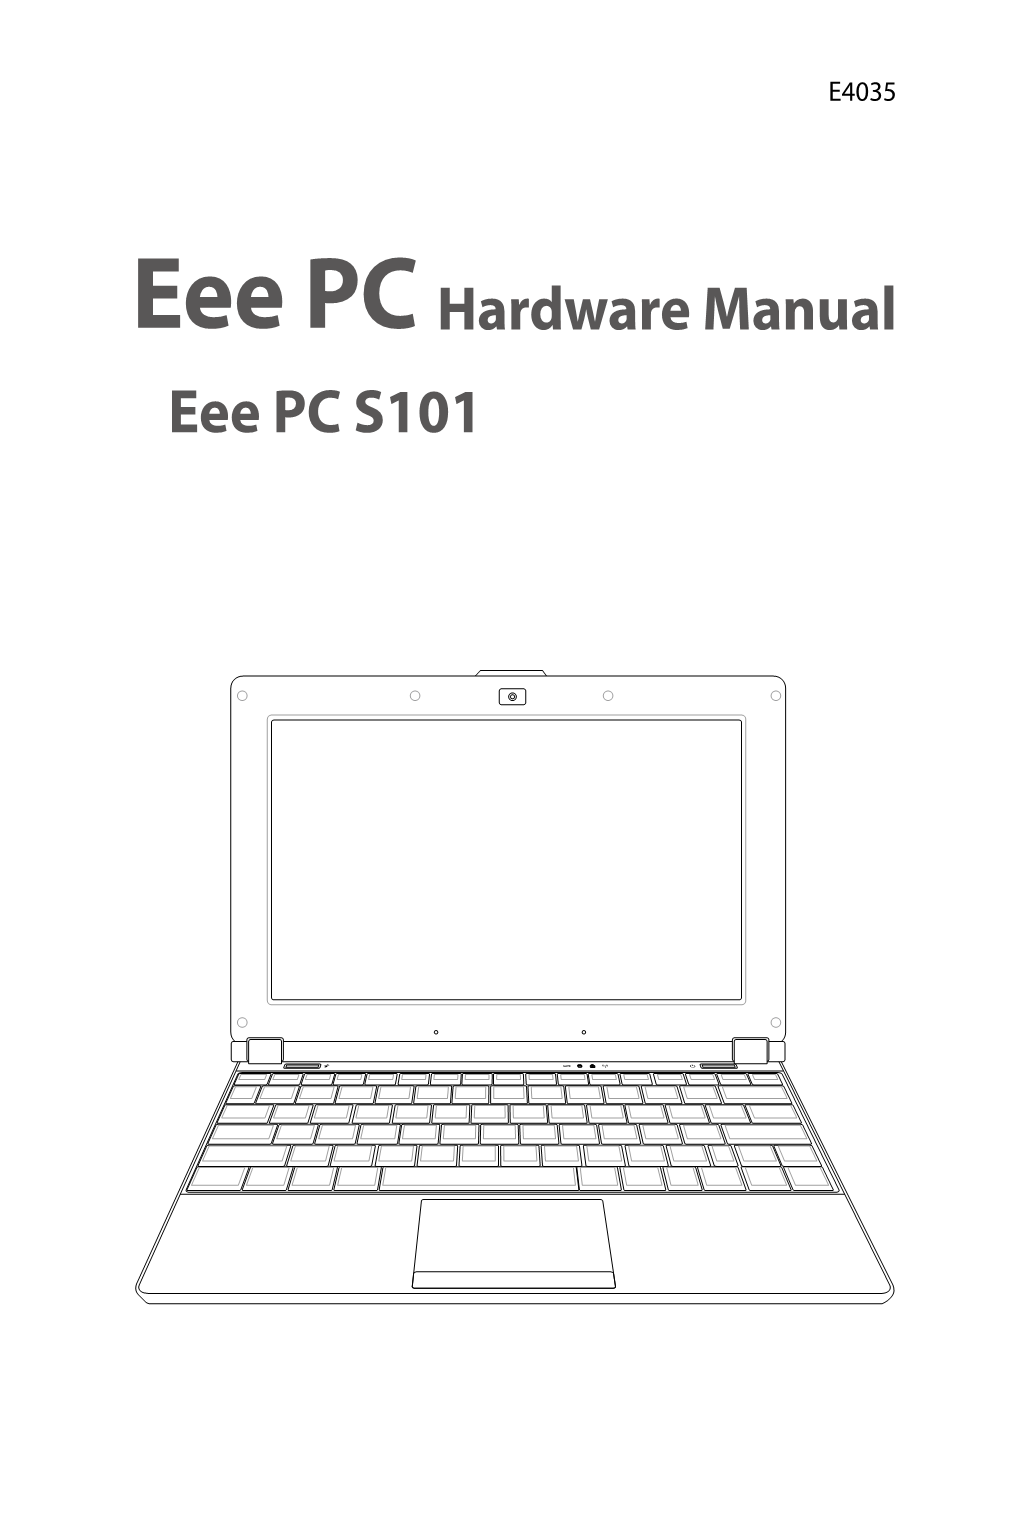 Eee PC Hardware Manual Eee PC S101 Table of Contents